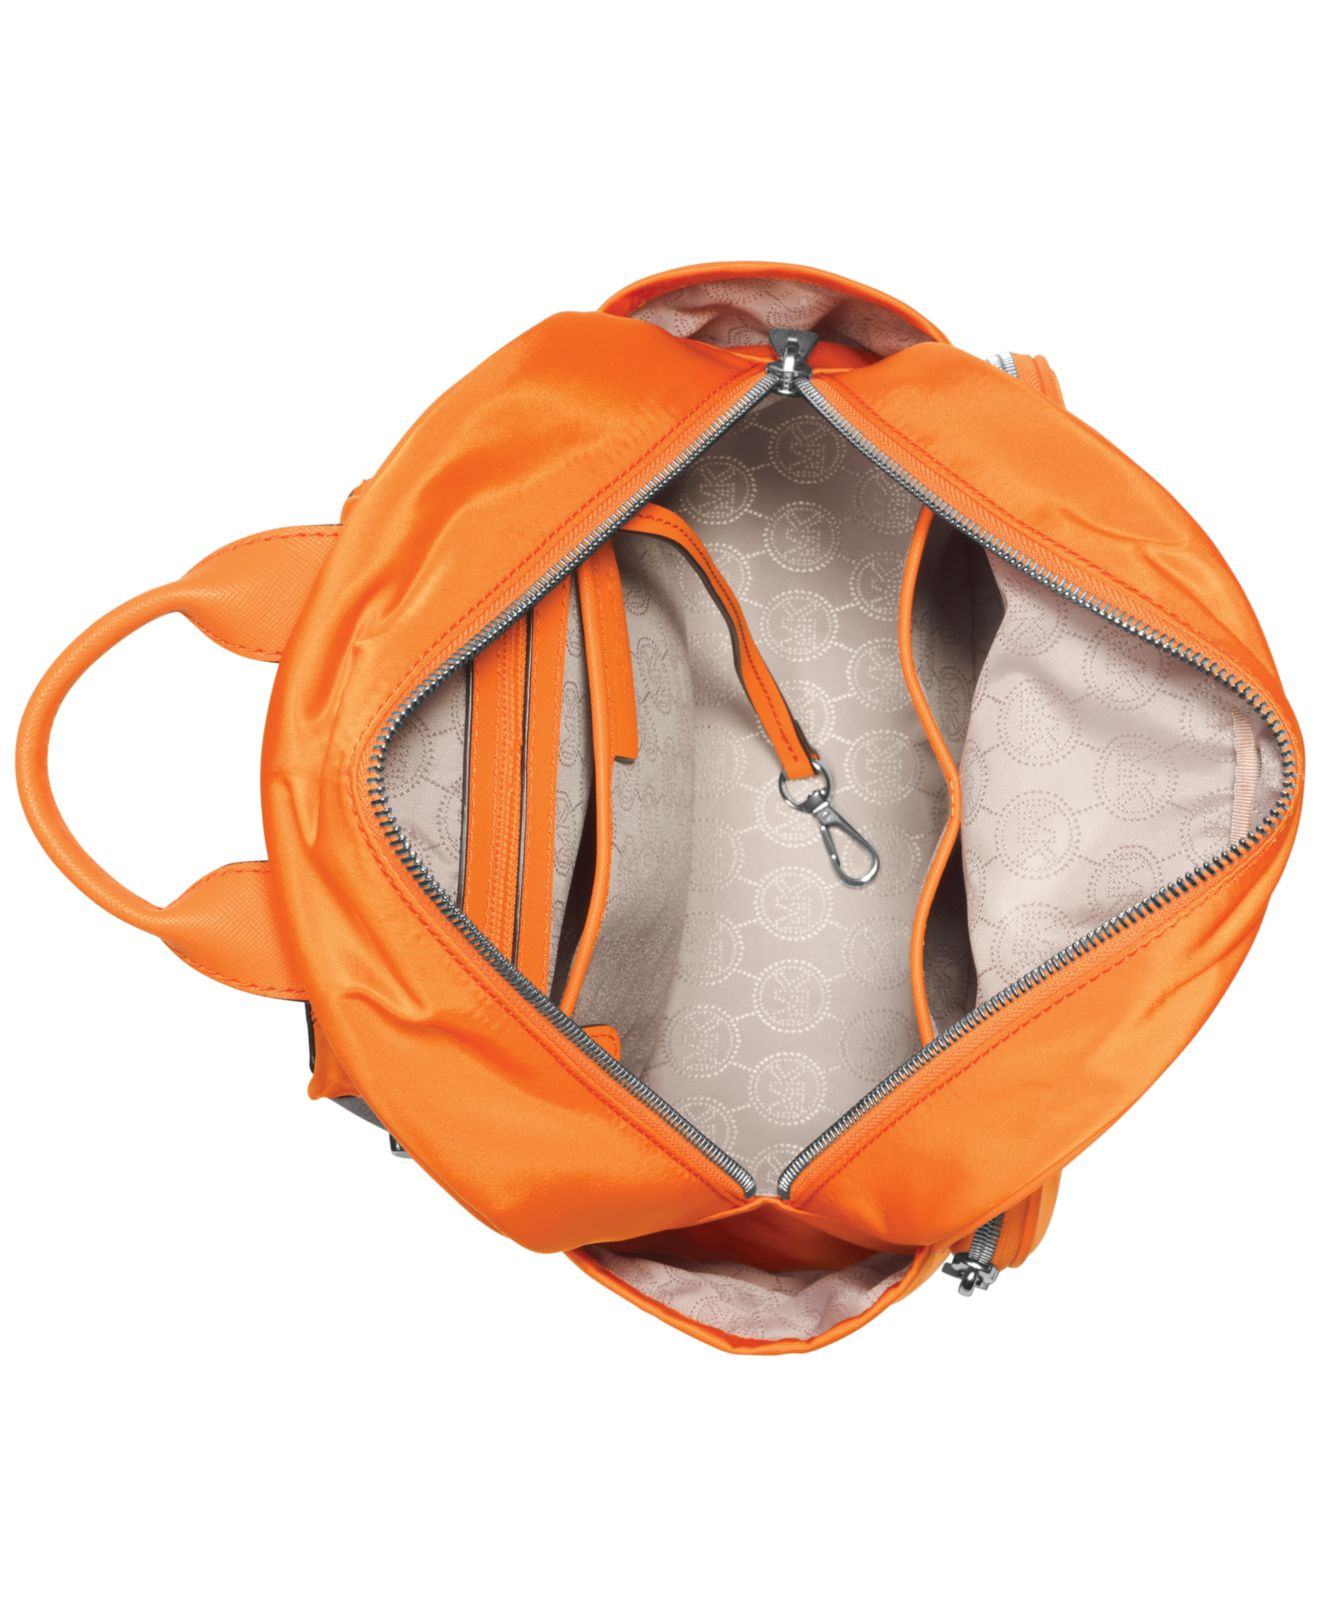 Michael Kors Michael Small Nylon Backpack - A Macy'S Exclusive in Orange